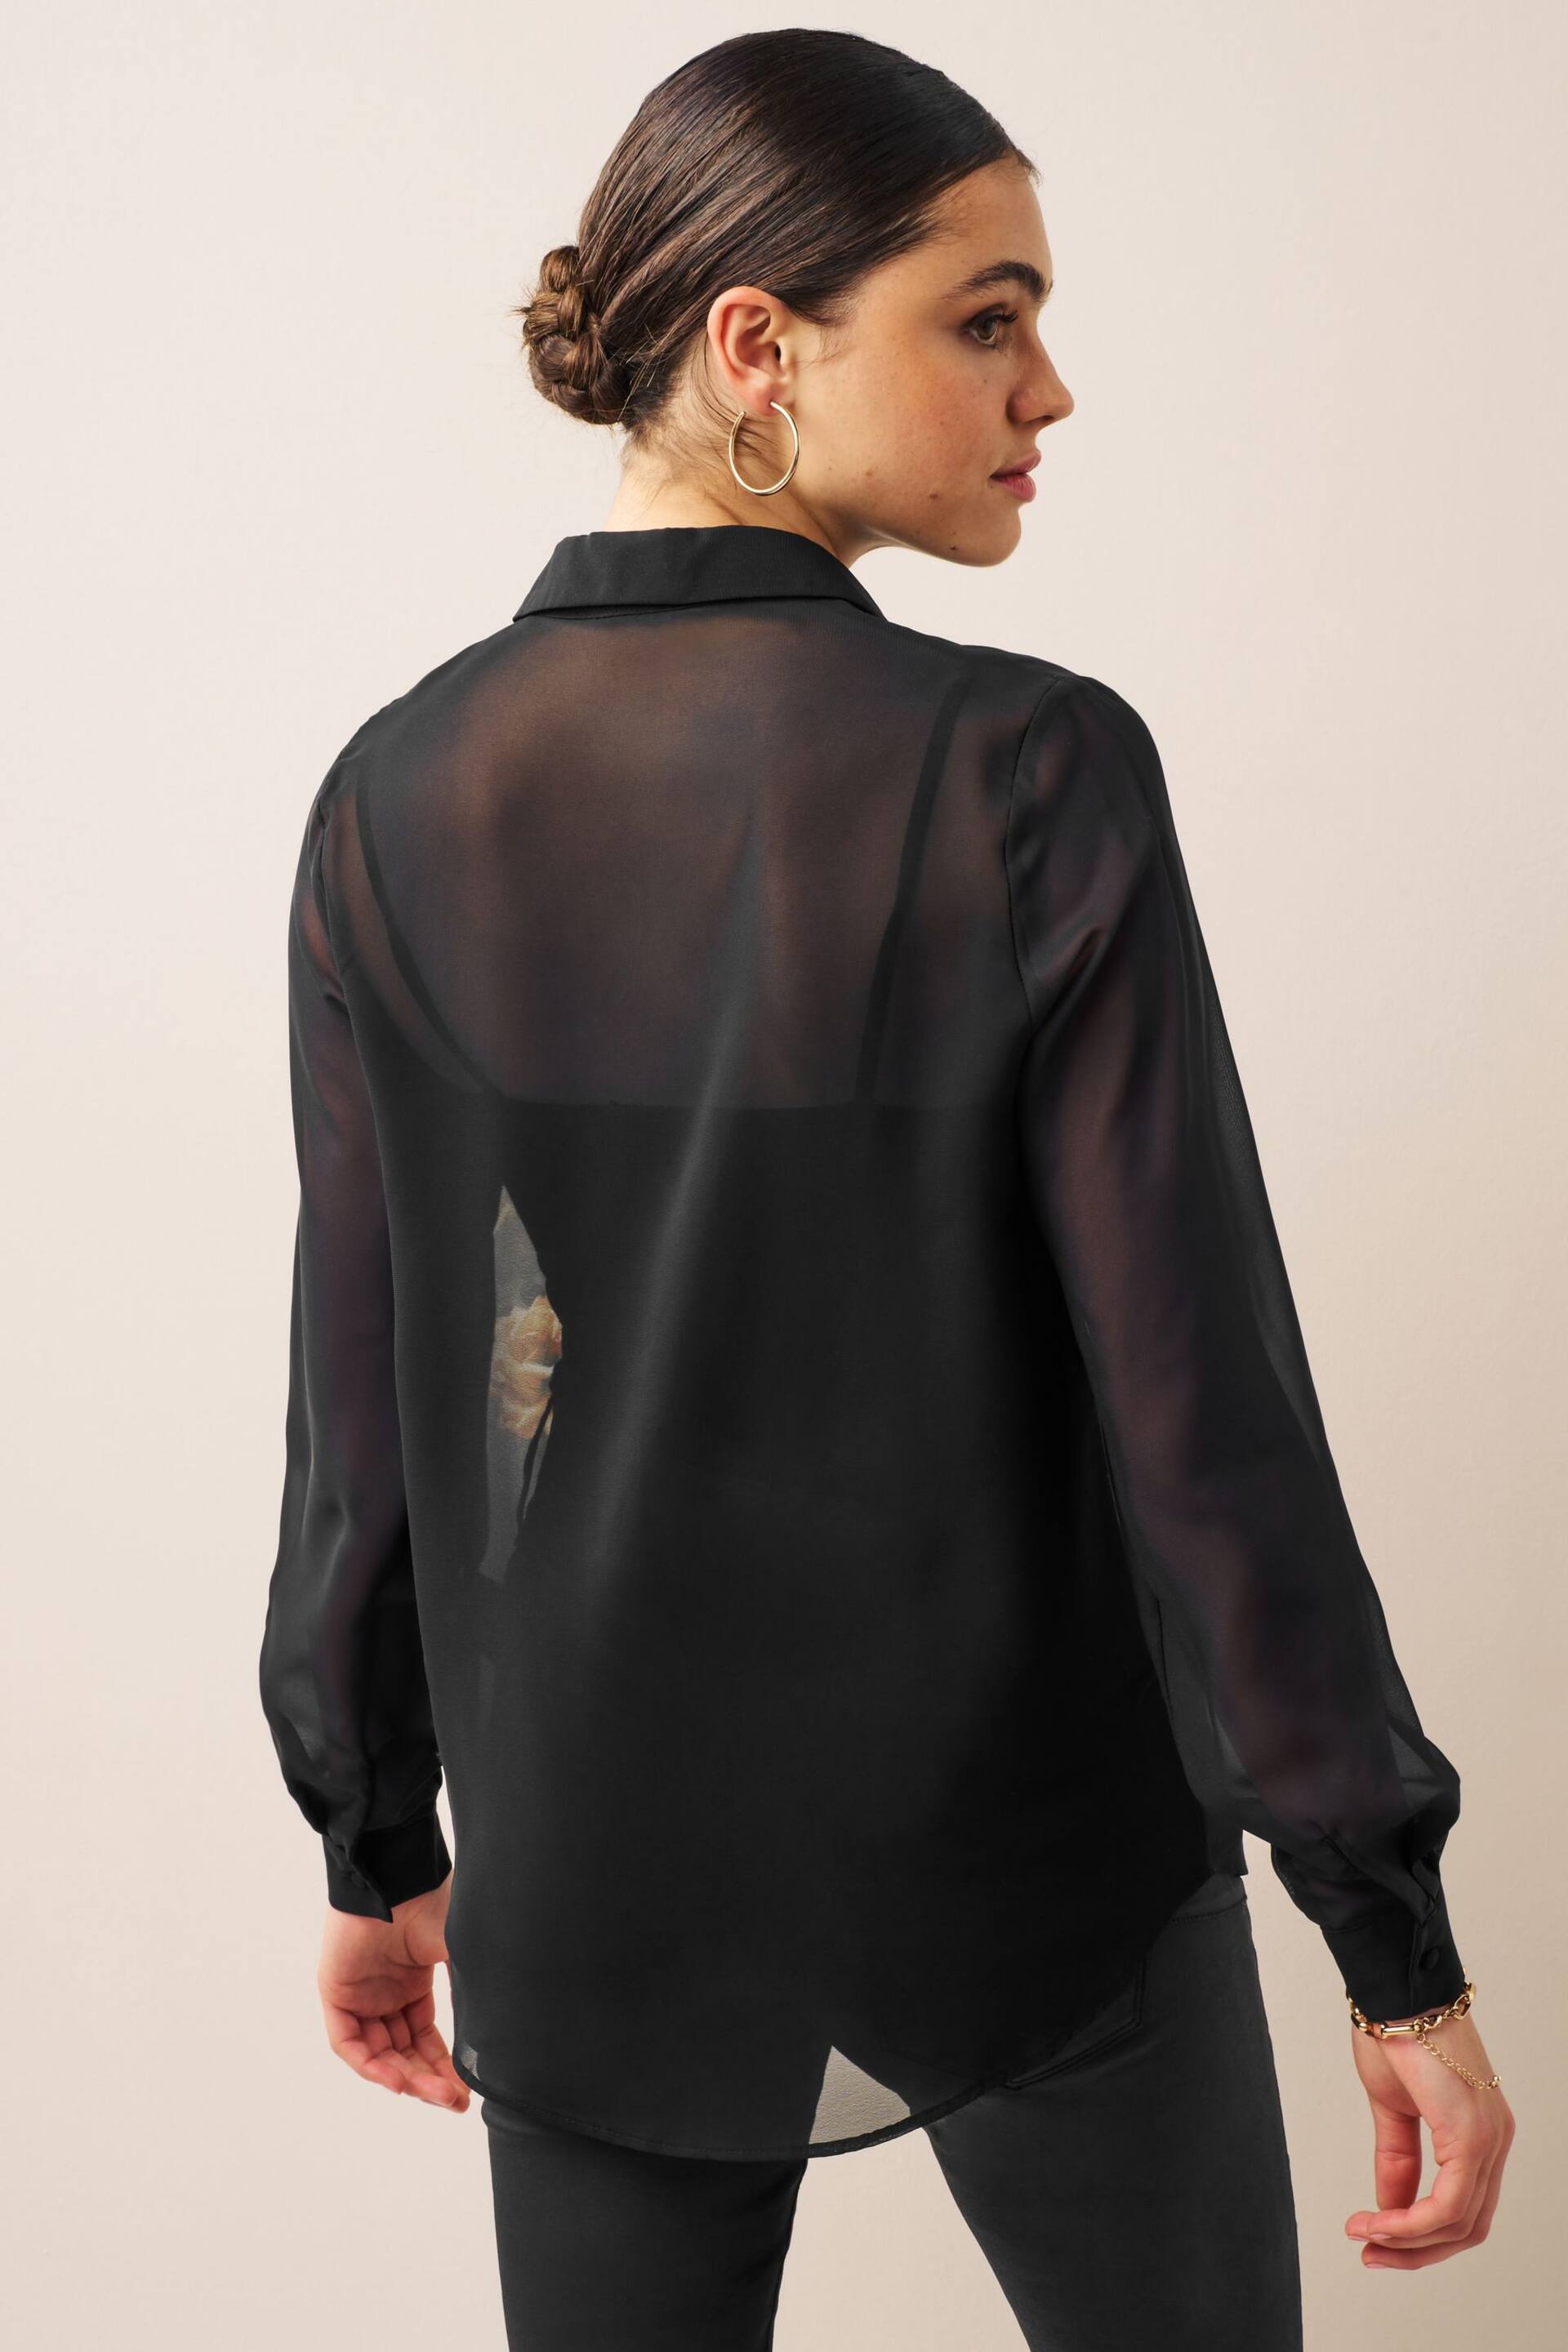 Black Floral Placement Print Long Sleeve Sheer Shirt - Image 3 of 6